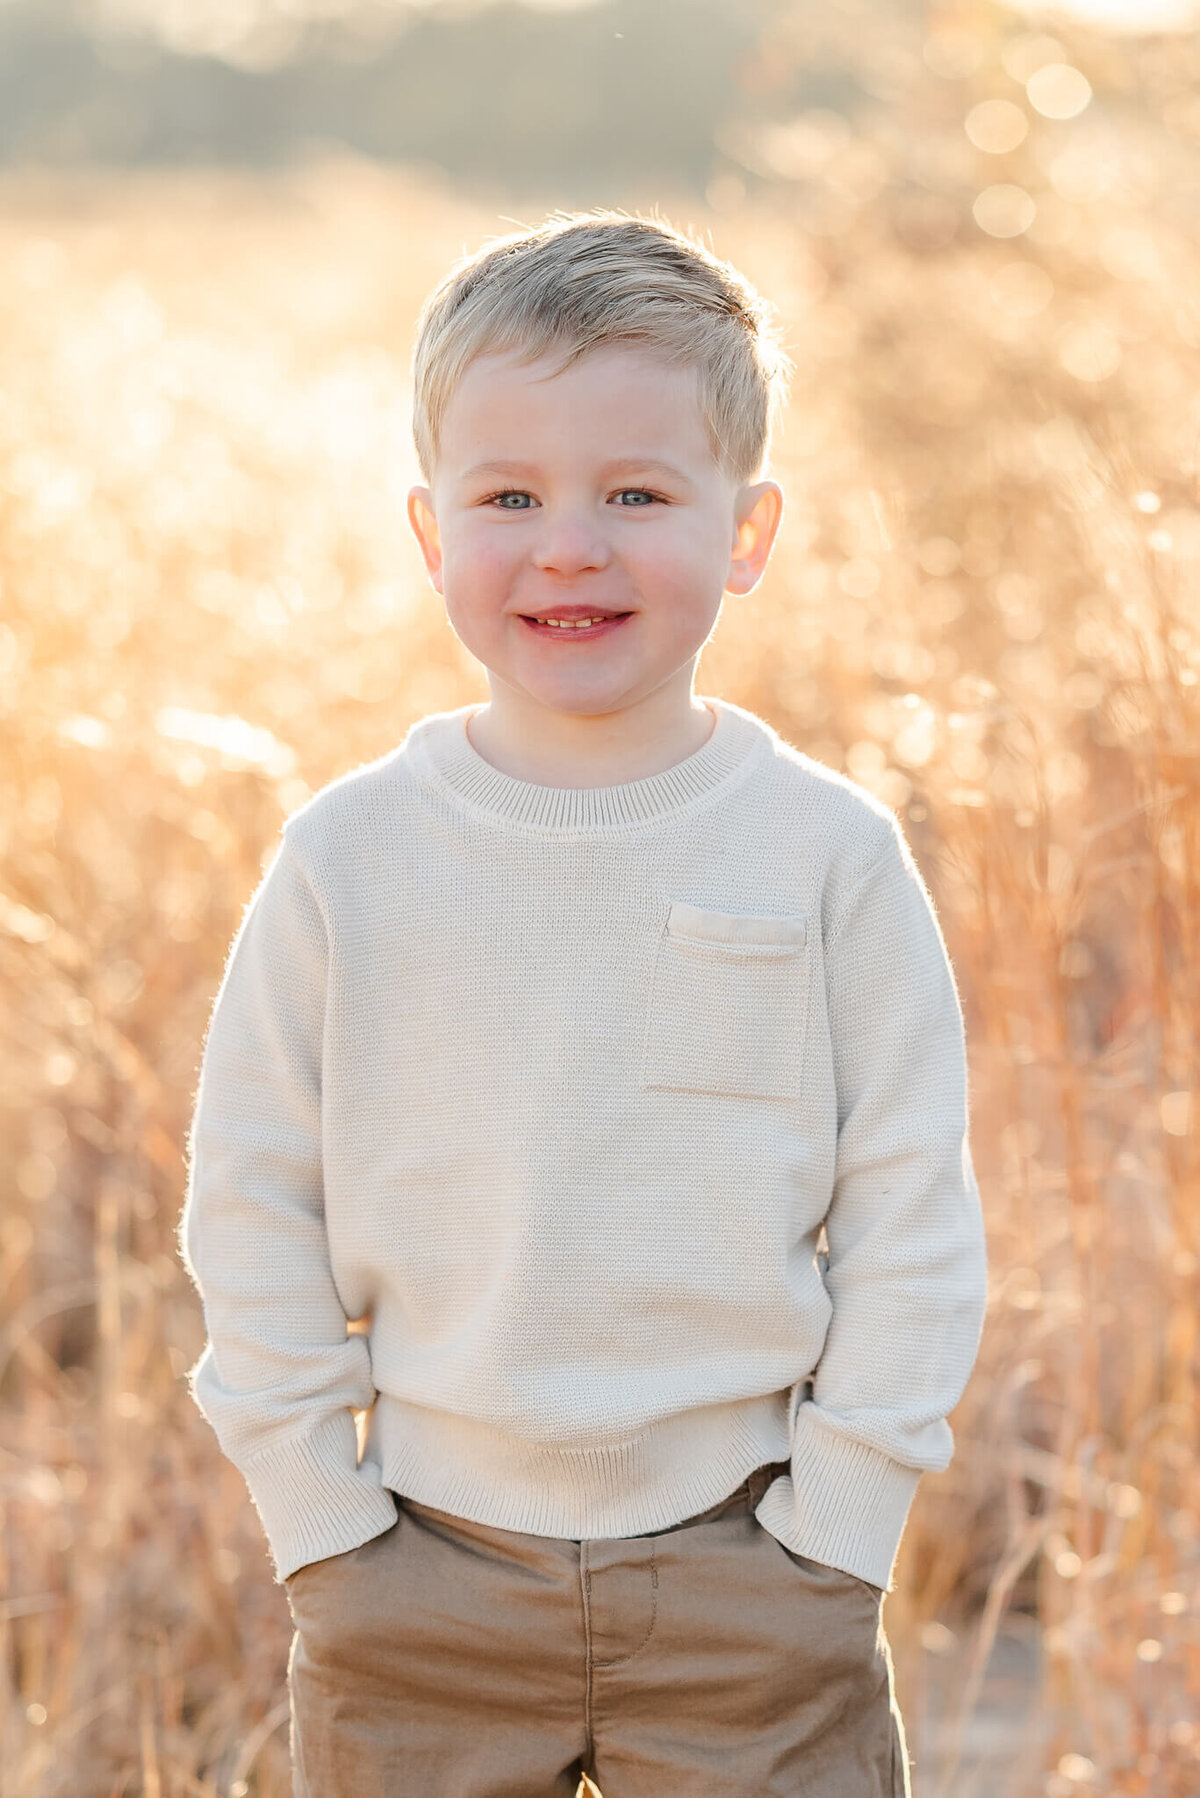 A young boy, wearing khakis and a long sleeve off-white shirt, puts his hands in his pockets and smiles. Photo captured by Justine Renee Photography.